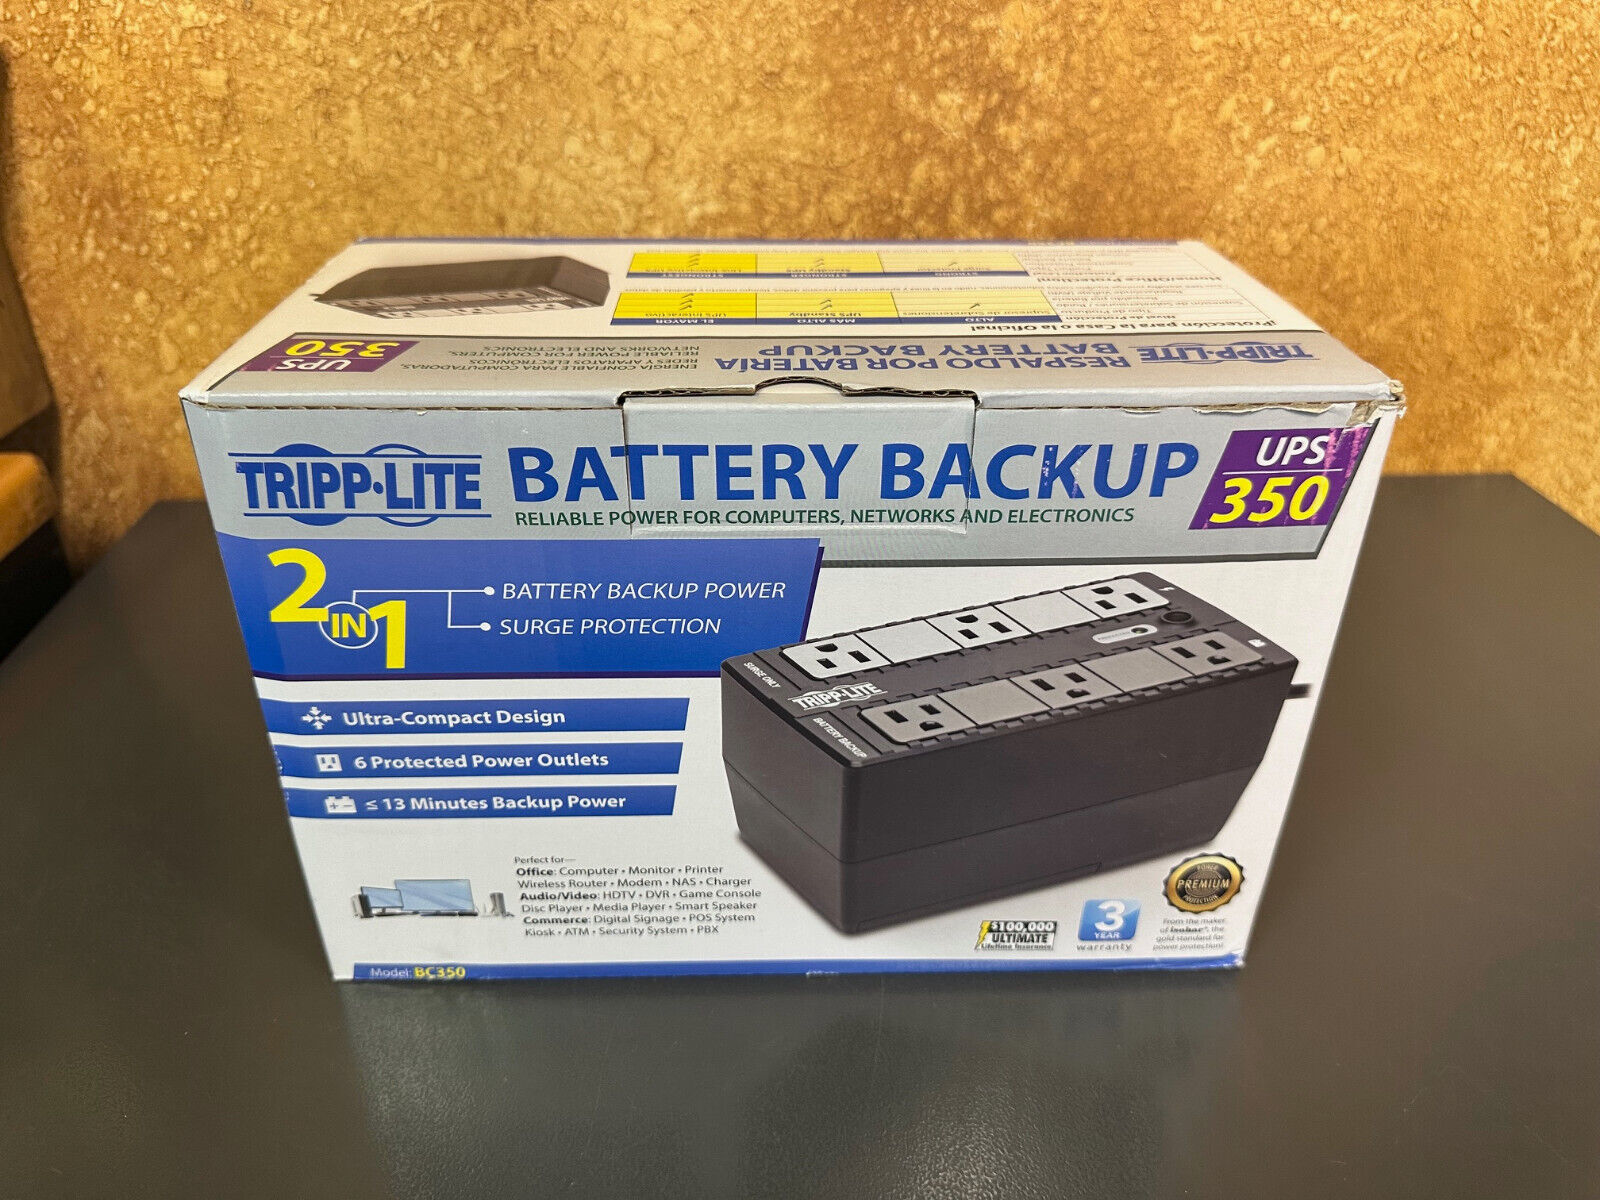 NEW Tripp Lite Battery Backup UPS 350 - 2in1- Battery Backup Surge Protection